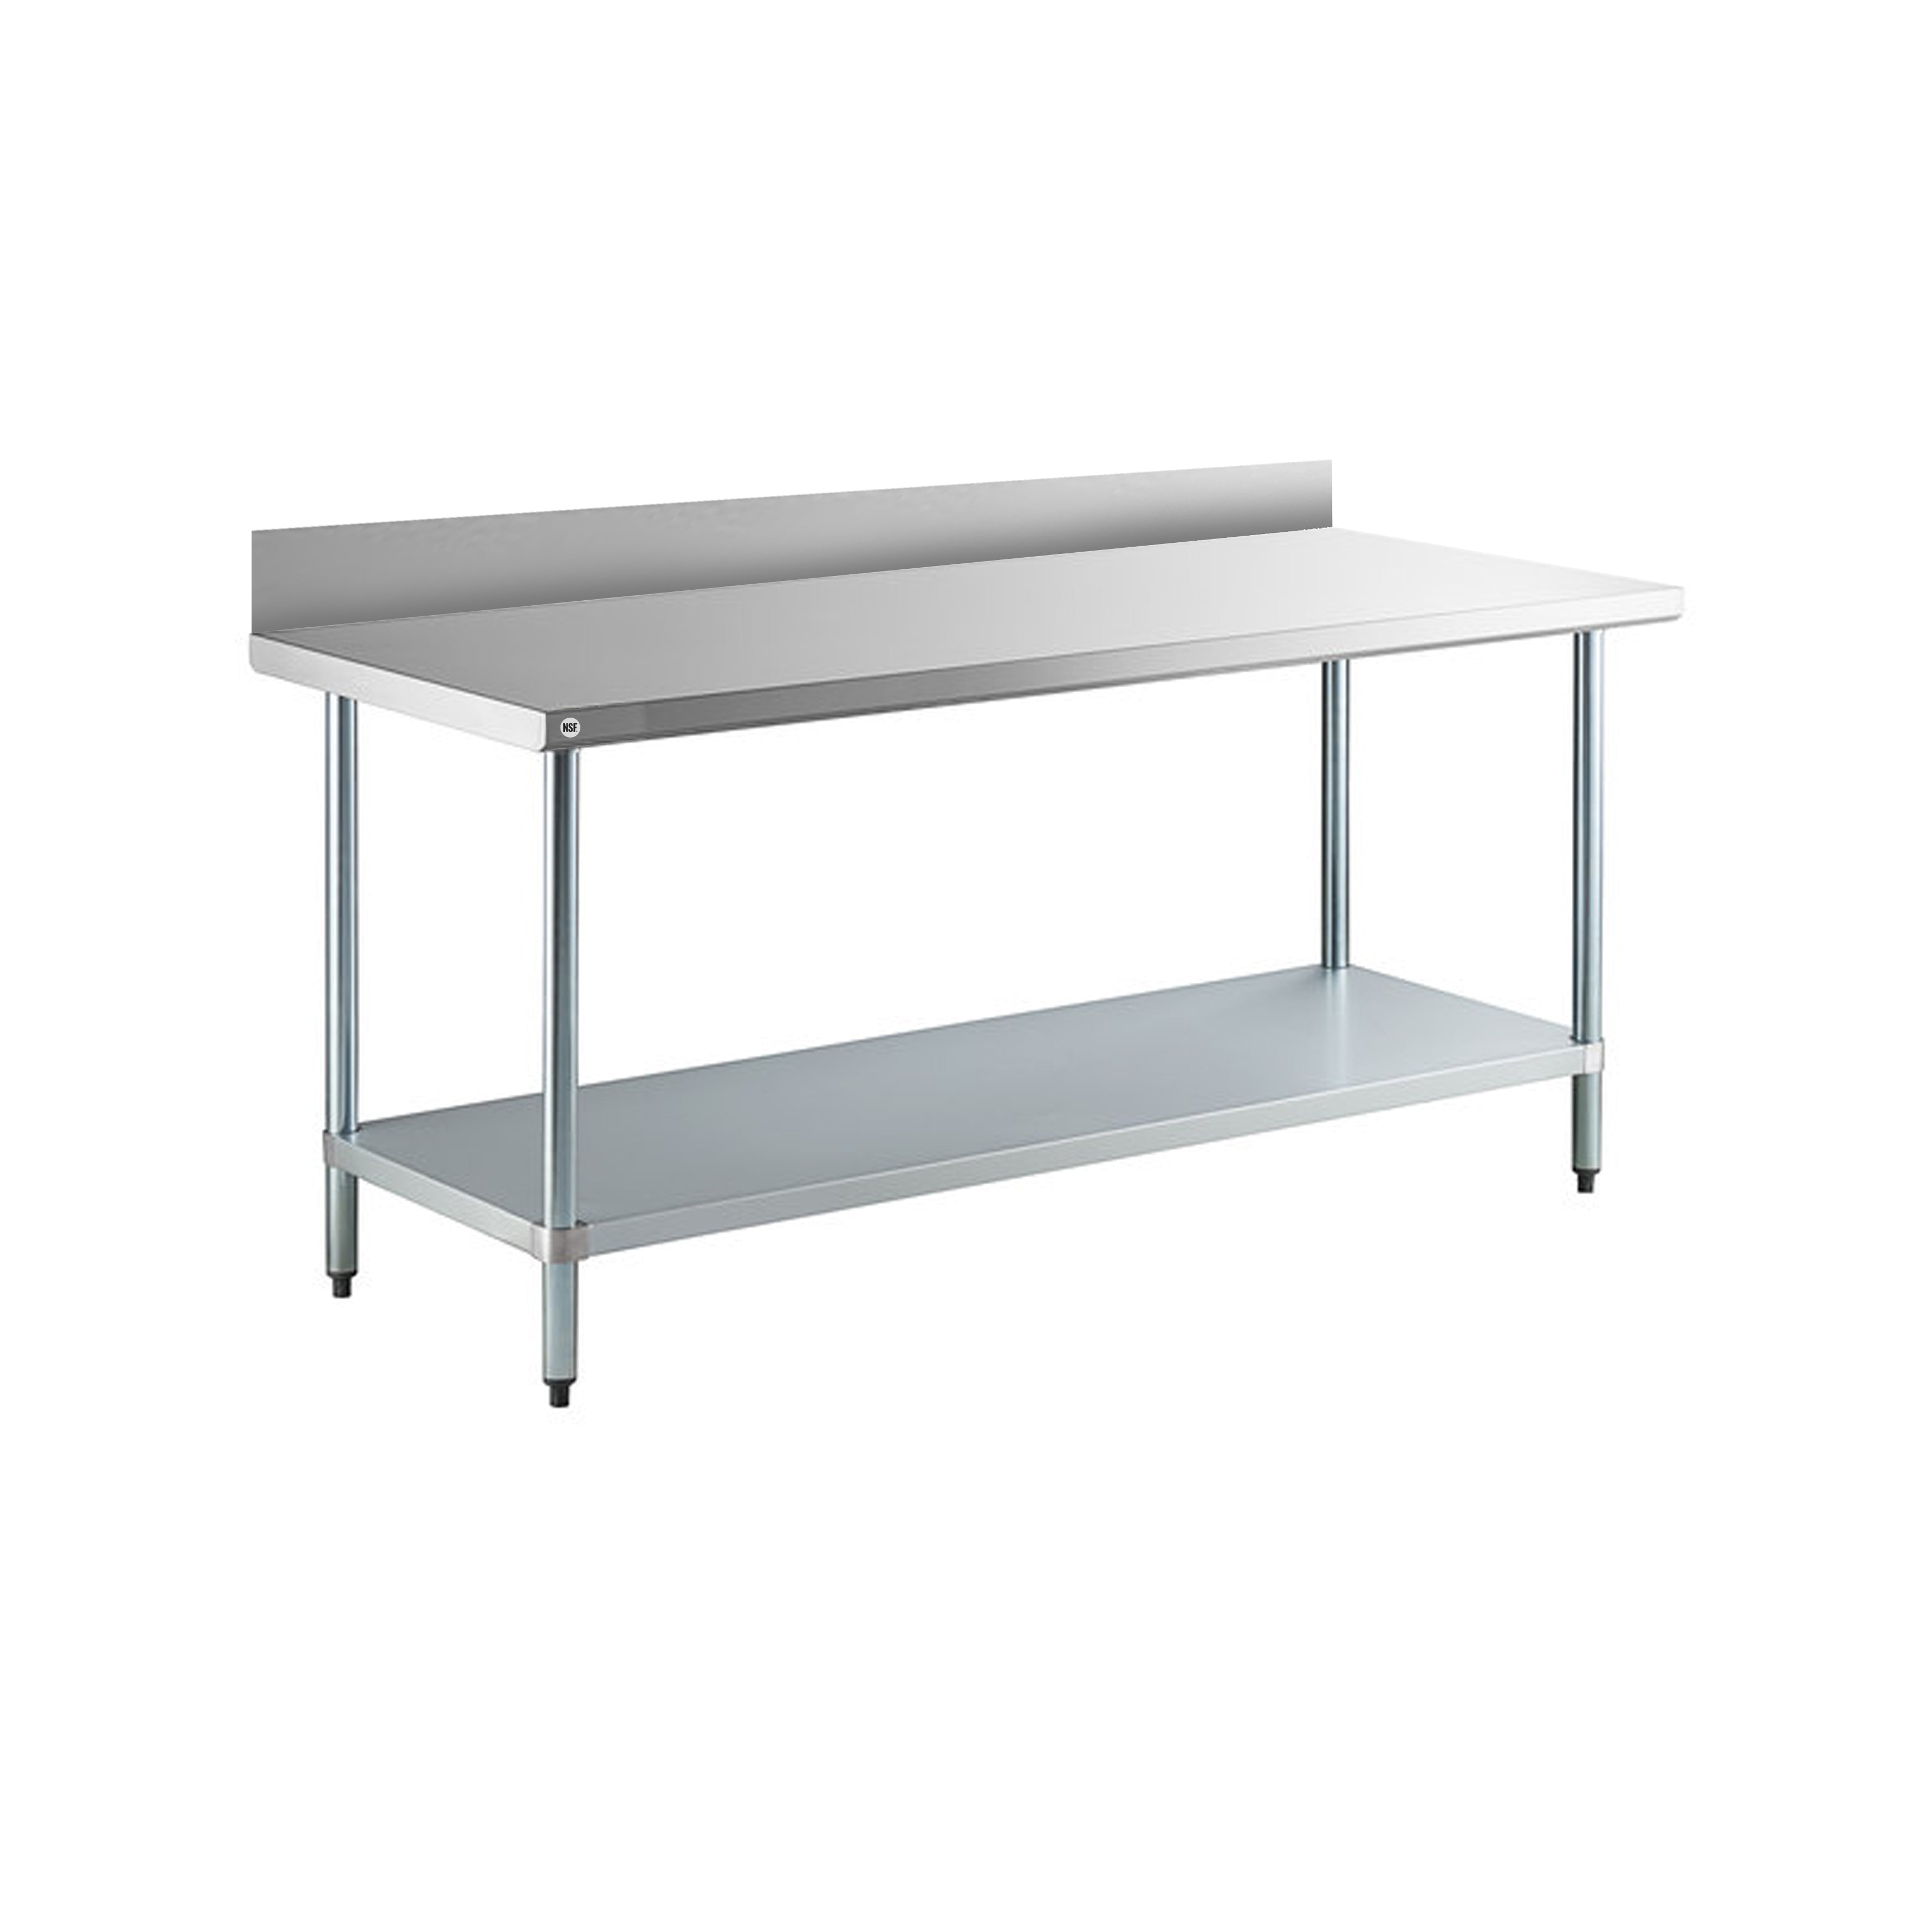 Omcan - 23797, Commercial 60" x 24" Stainless Steel Kitchen Work Table with 4" Back Splash 1100lbs Medium Duty